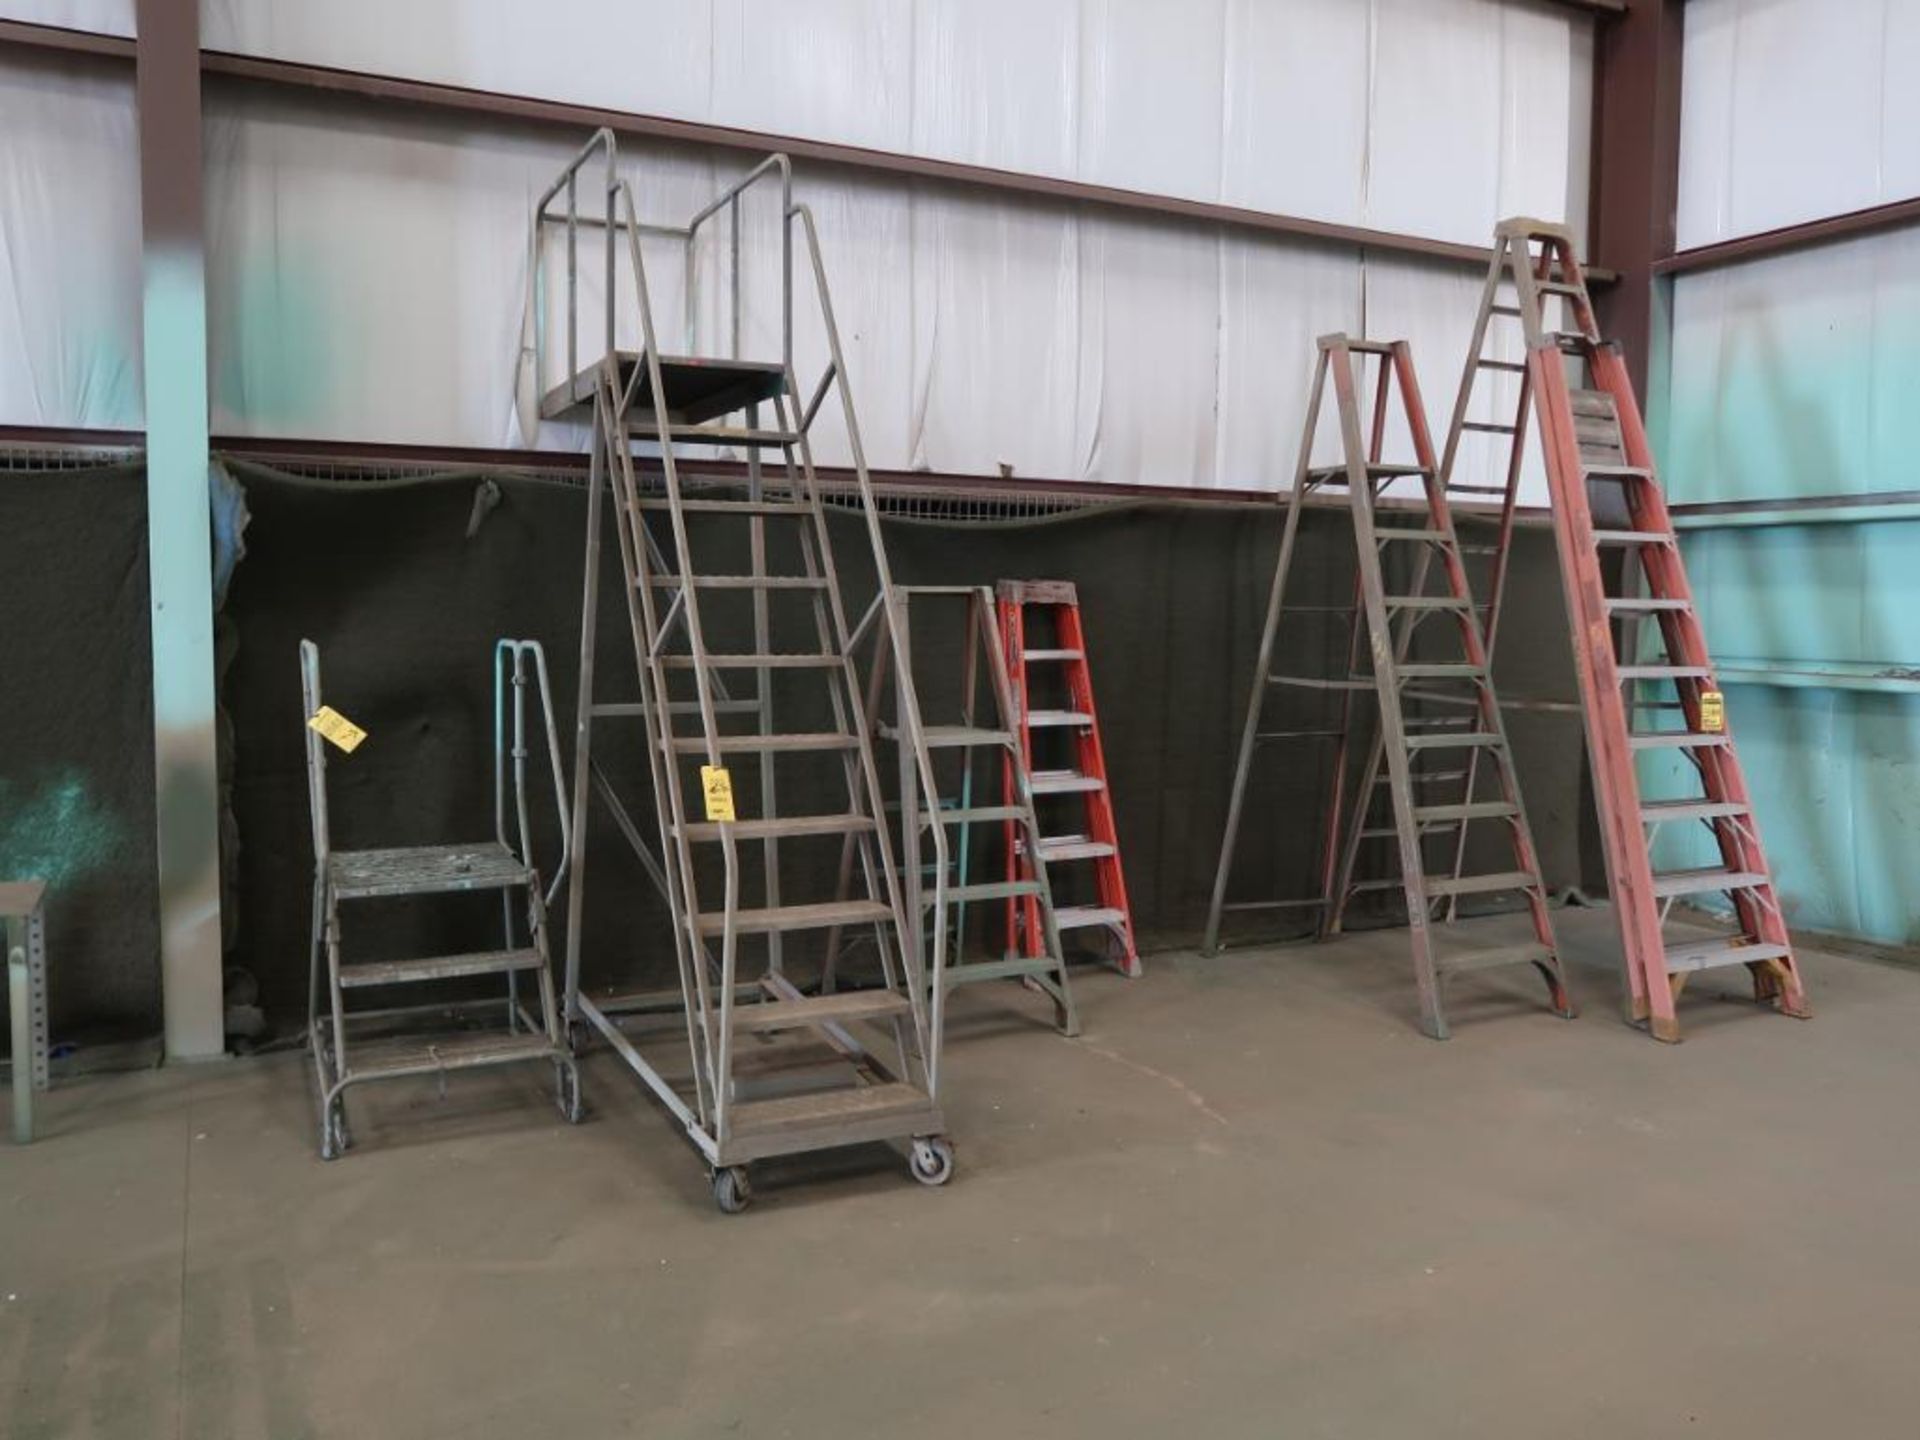 10-STEP ROLLING STAIRS, 3-STEP ROLLING STAIRS, 4', 6', (2) 8', 12' LADDERS